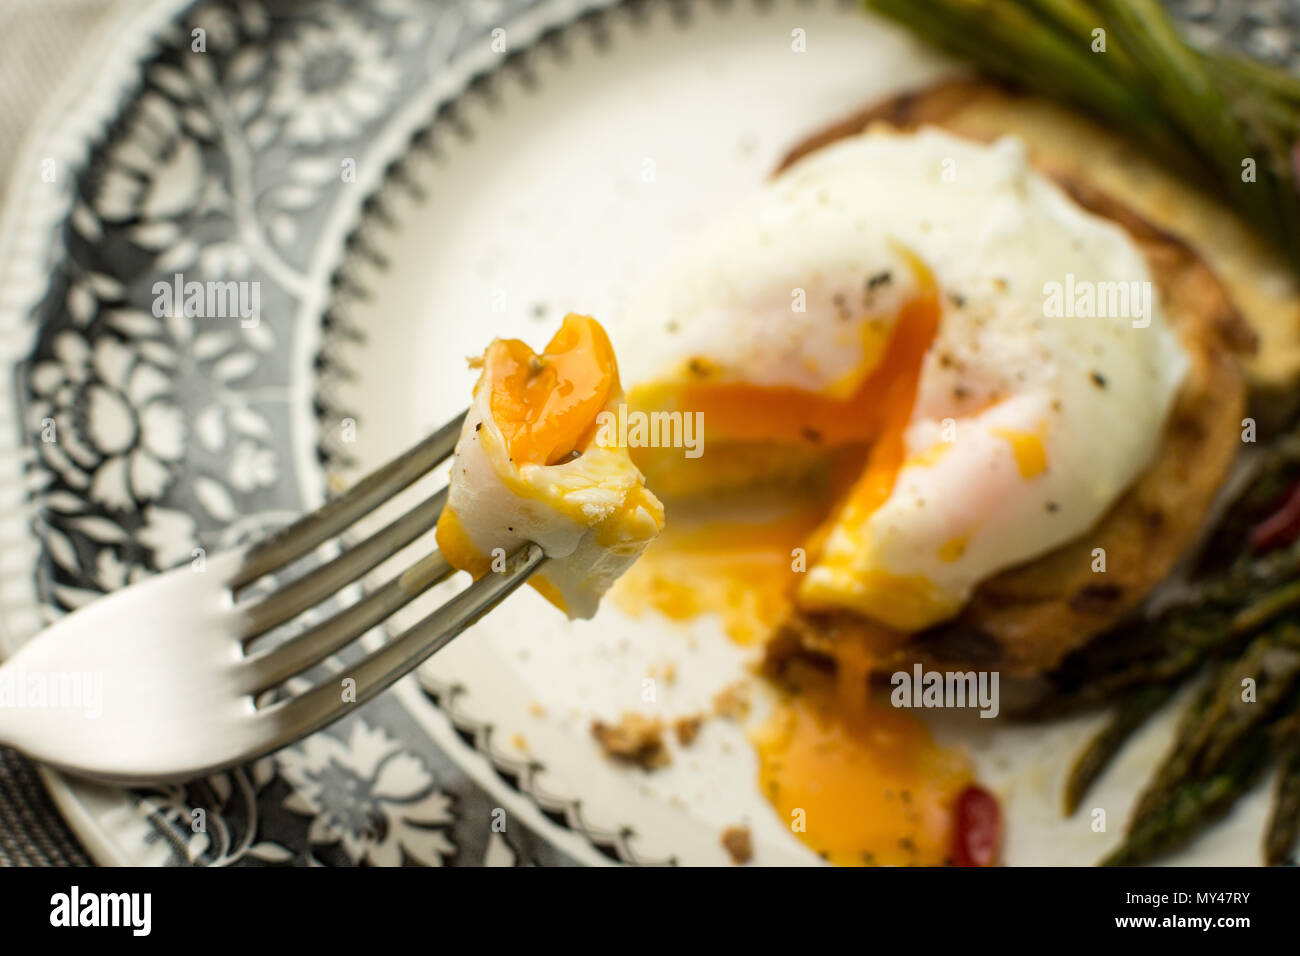 Toasted Bread with Poached Egg, Green Asparagus and Chili Peppers. Healthy Breakfast Concept. Stock Photo